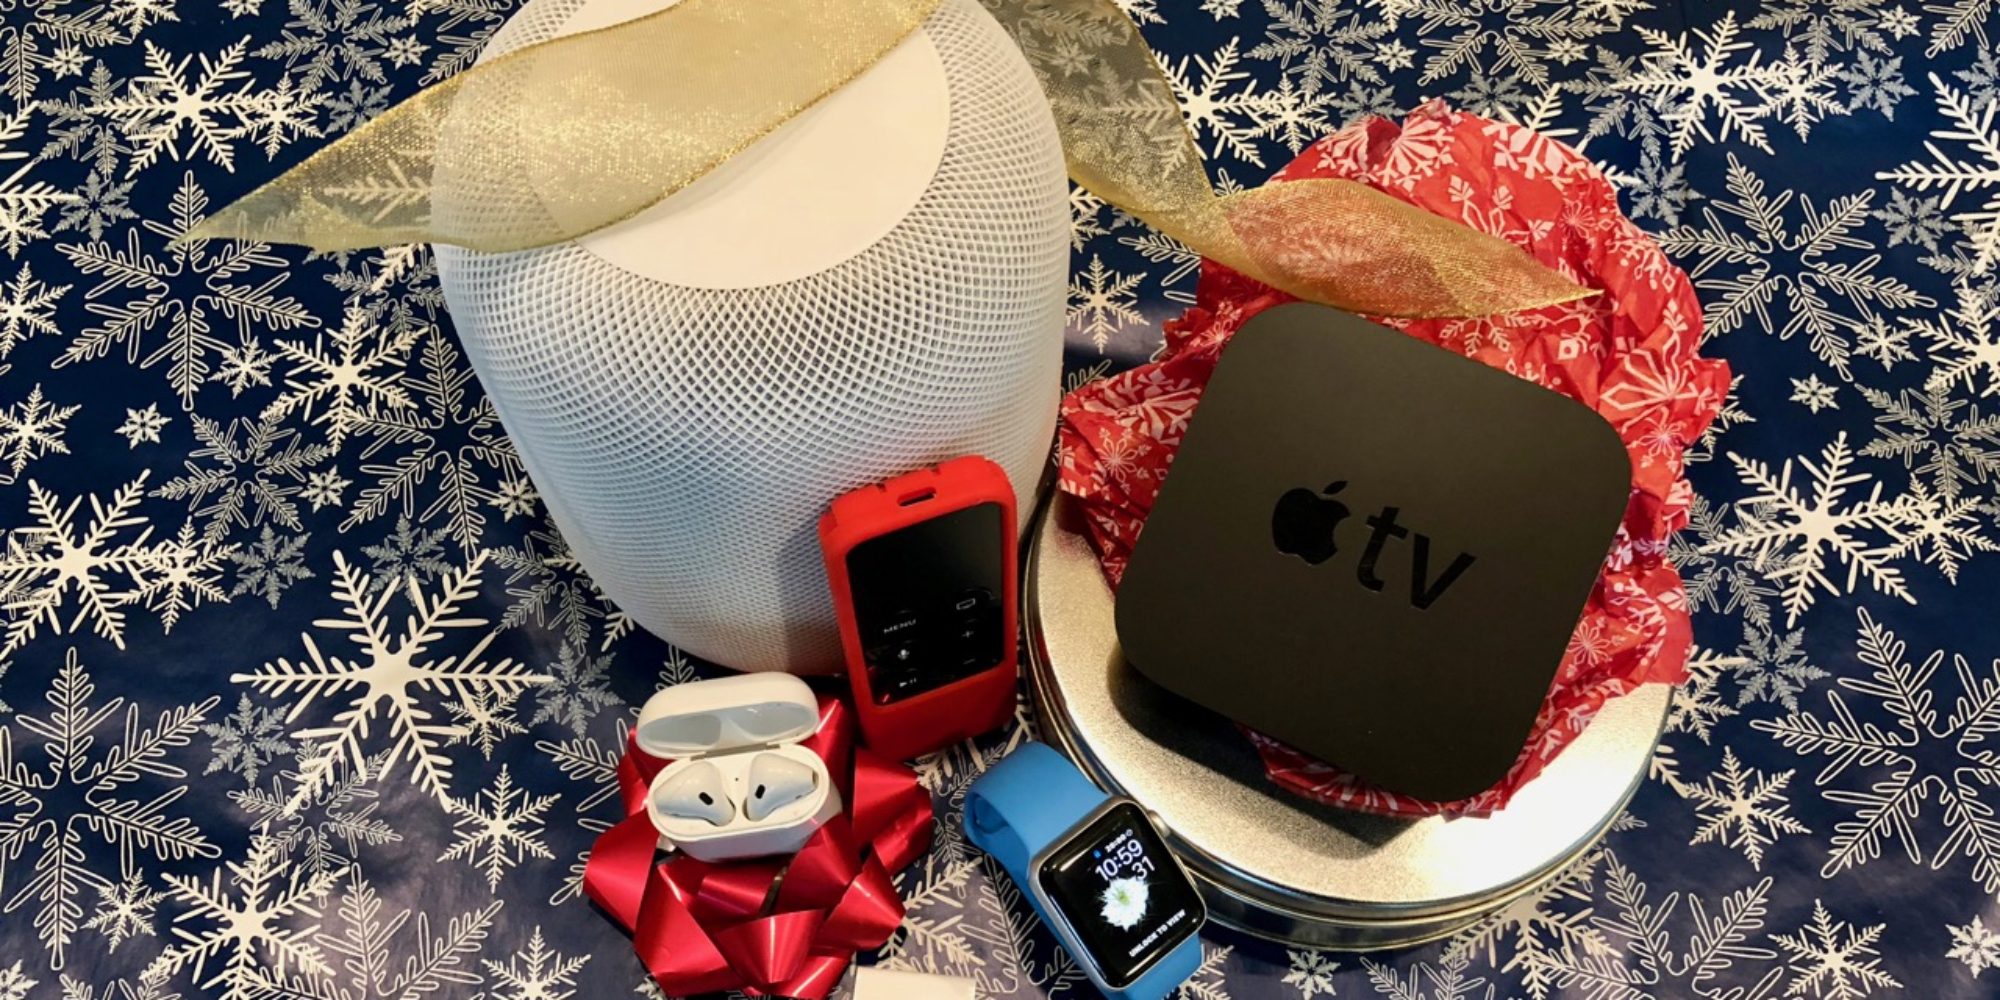 The Best Apple-Related Gifts for 2018